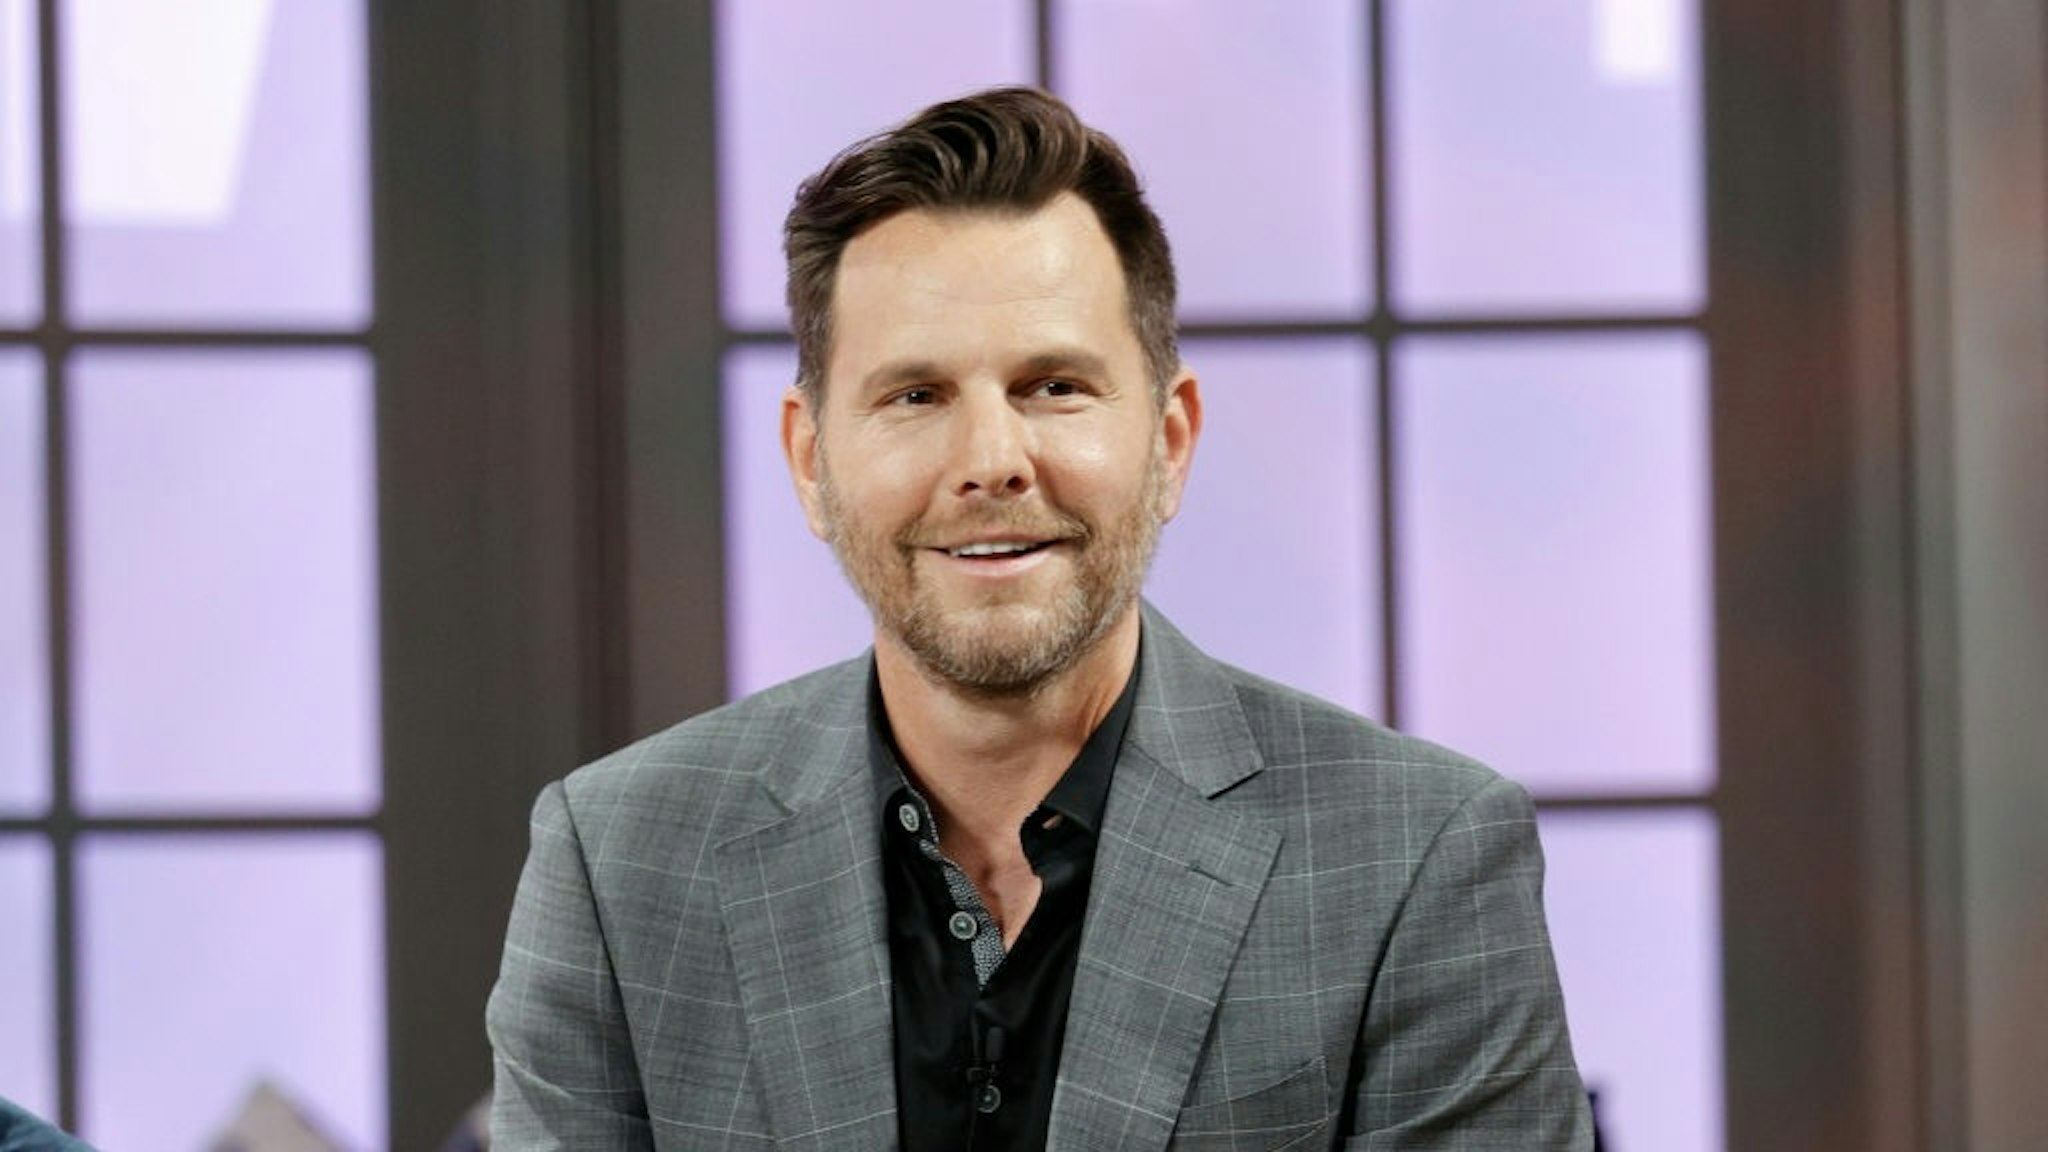 "Candace" Hosted By Candace Owens NASHVILLE, TENNESSEE - APRIL 28: Dave Rubin is seen on the set of "Candace" on April 28, 2021 in Nashville, Tennessee. The show will air on Friday, April 30, 2021. (Photo by Jason Kempin/Getty Images) Jason Kempin / Staff